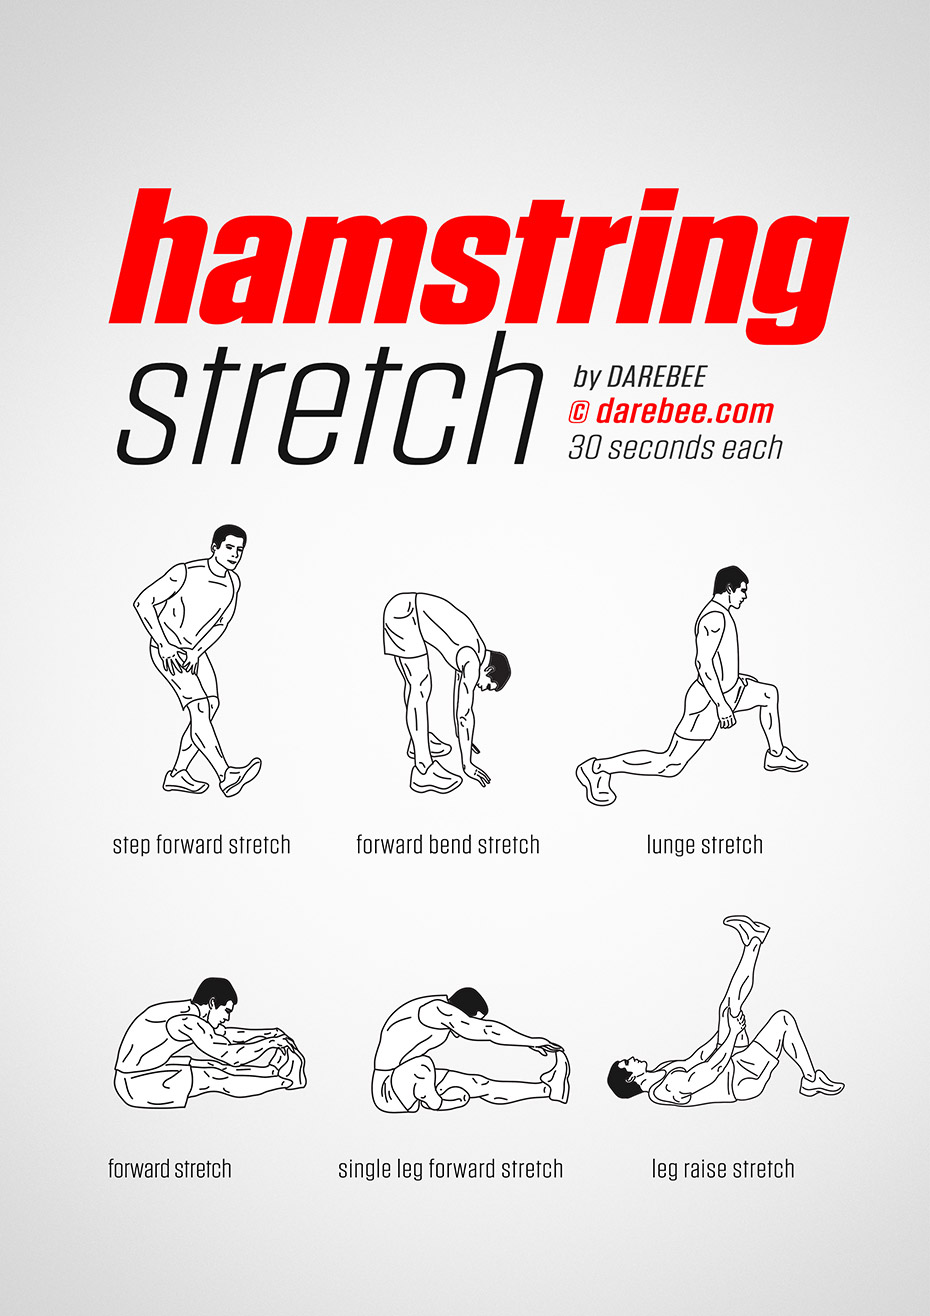 Are You Doing These Stretching Exercises After That Epic Run? Playo